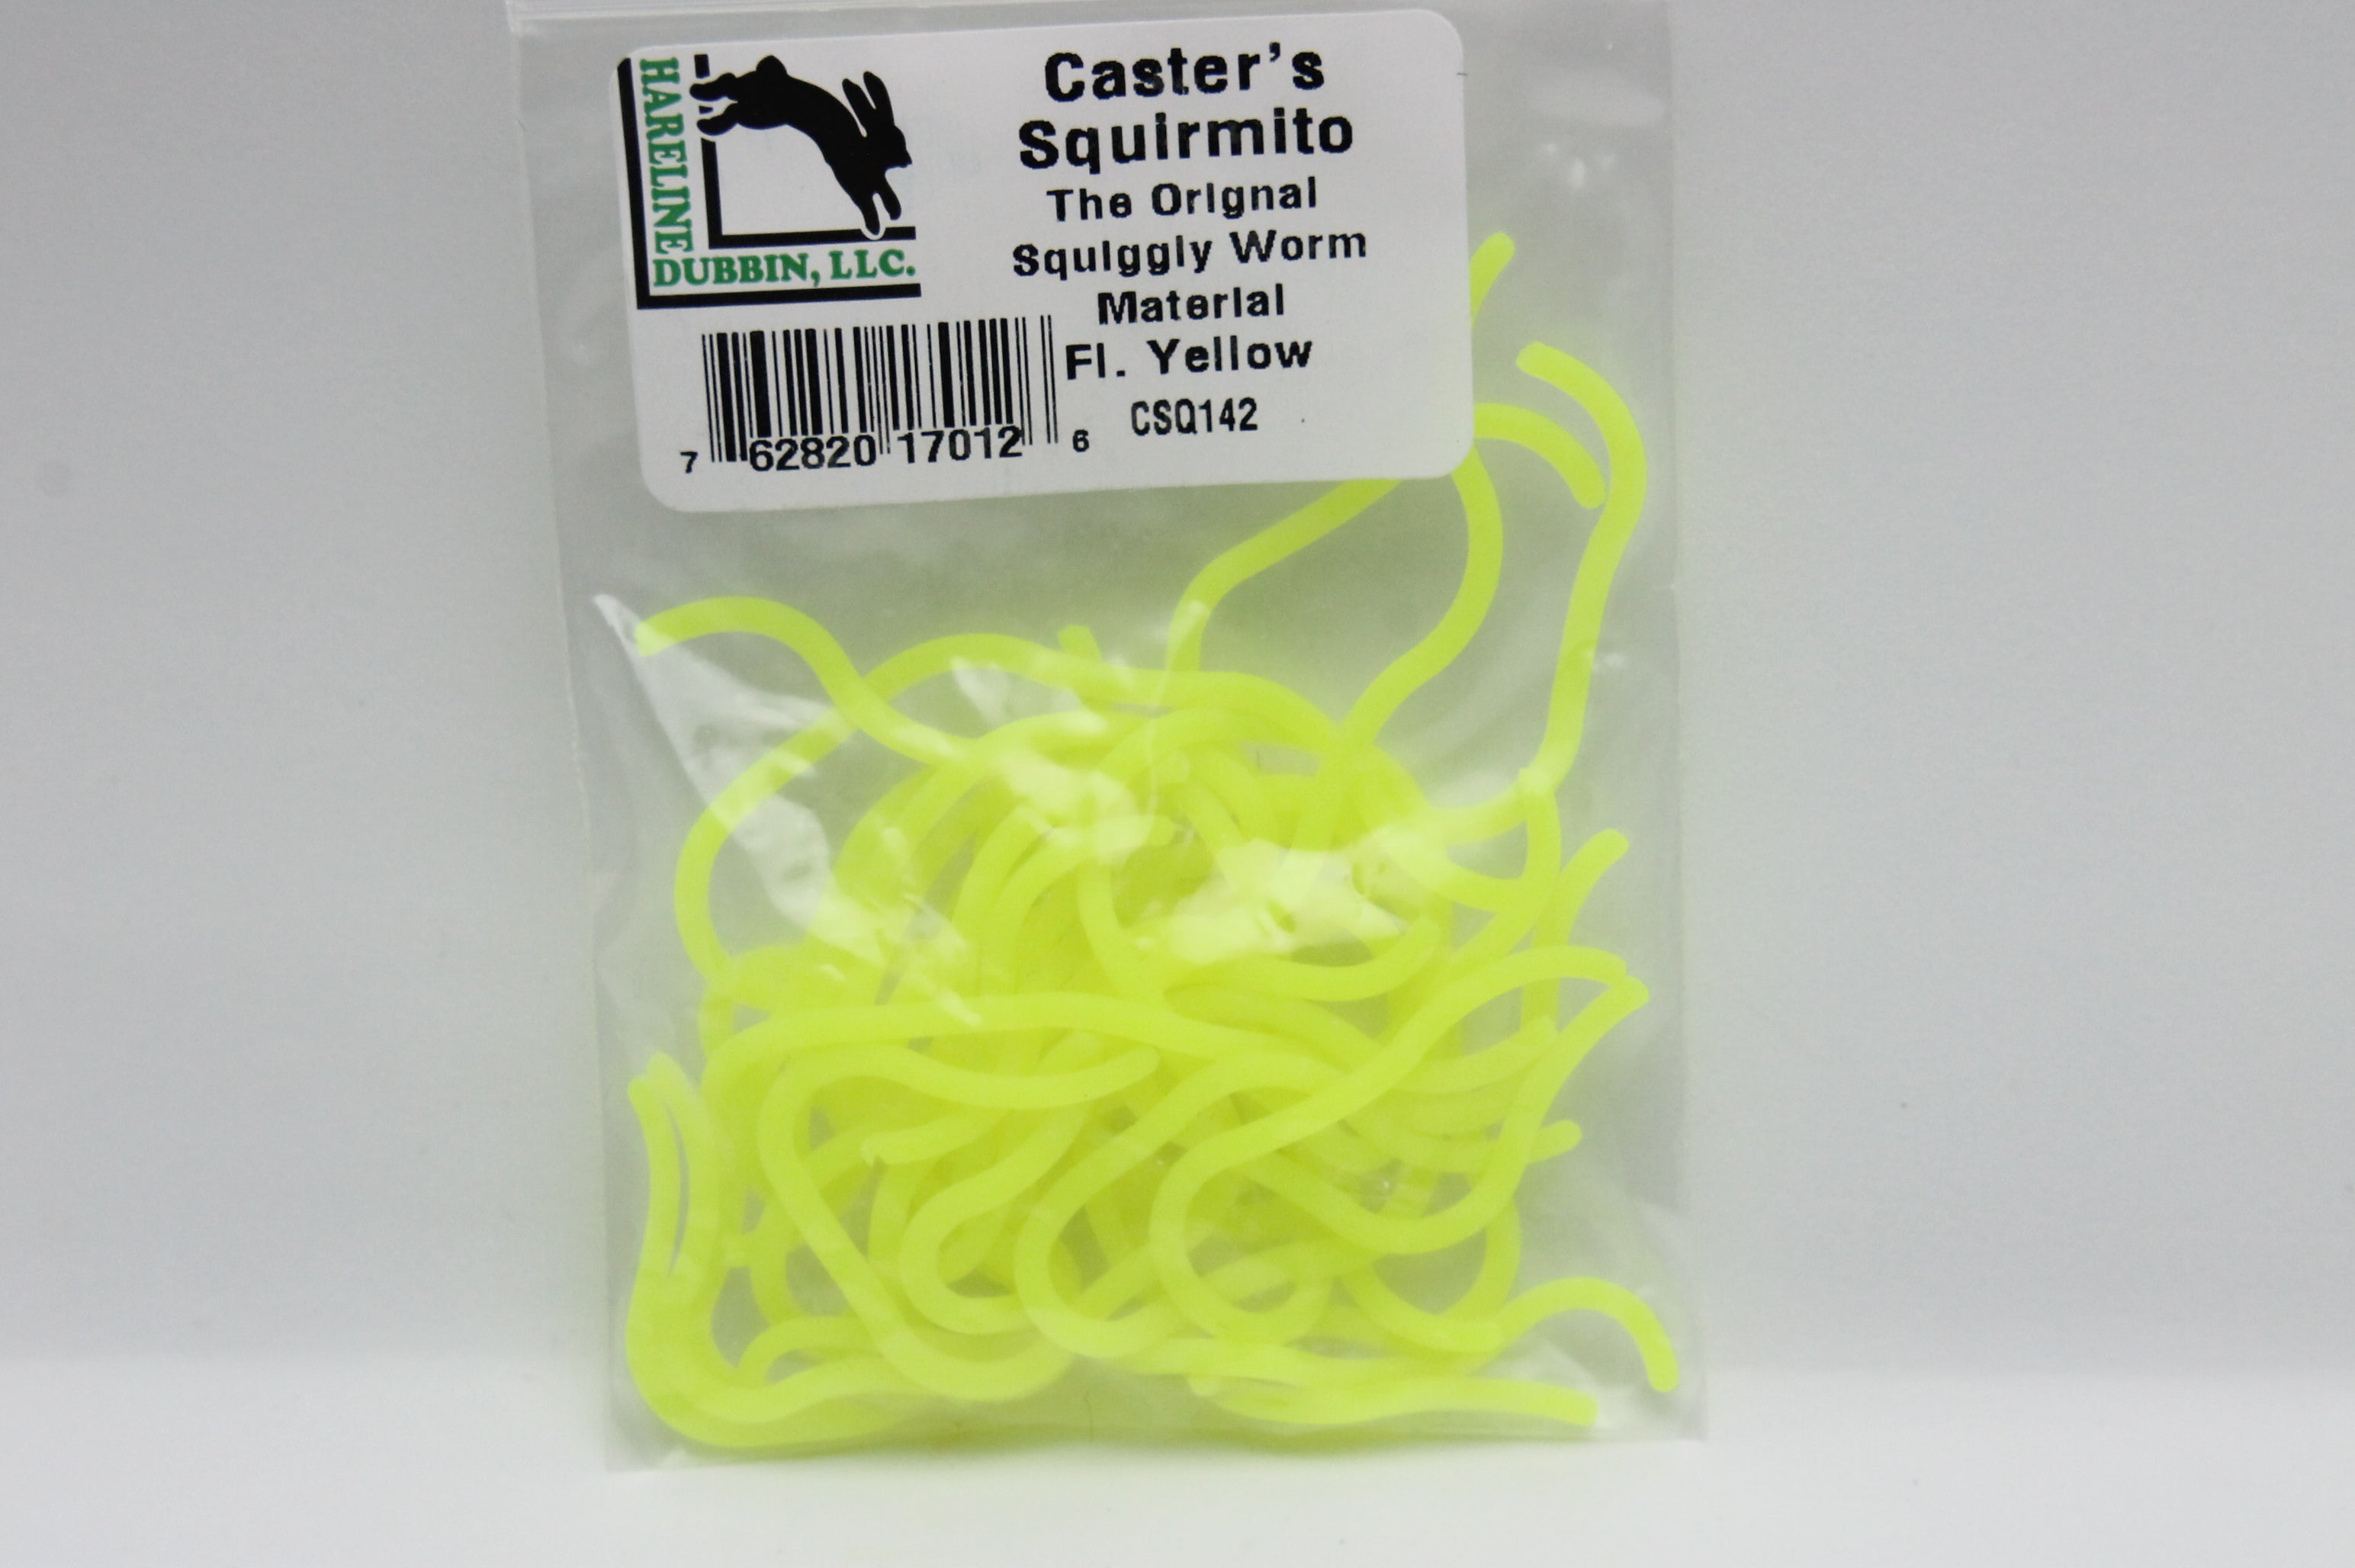 Caster's Squirmito The Original Squiggly Worm Material Worm Tan